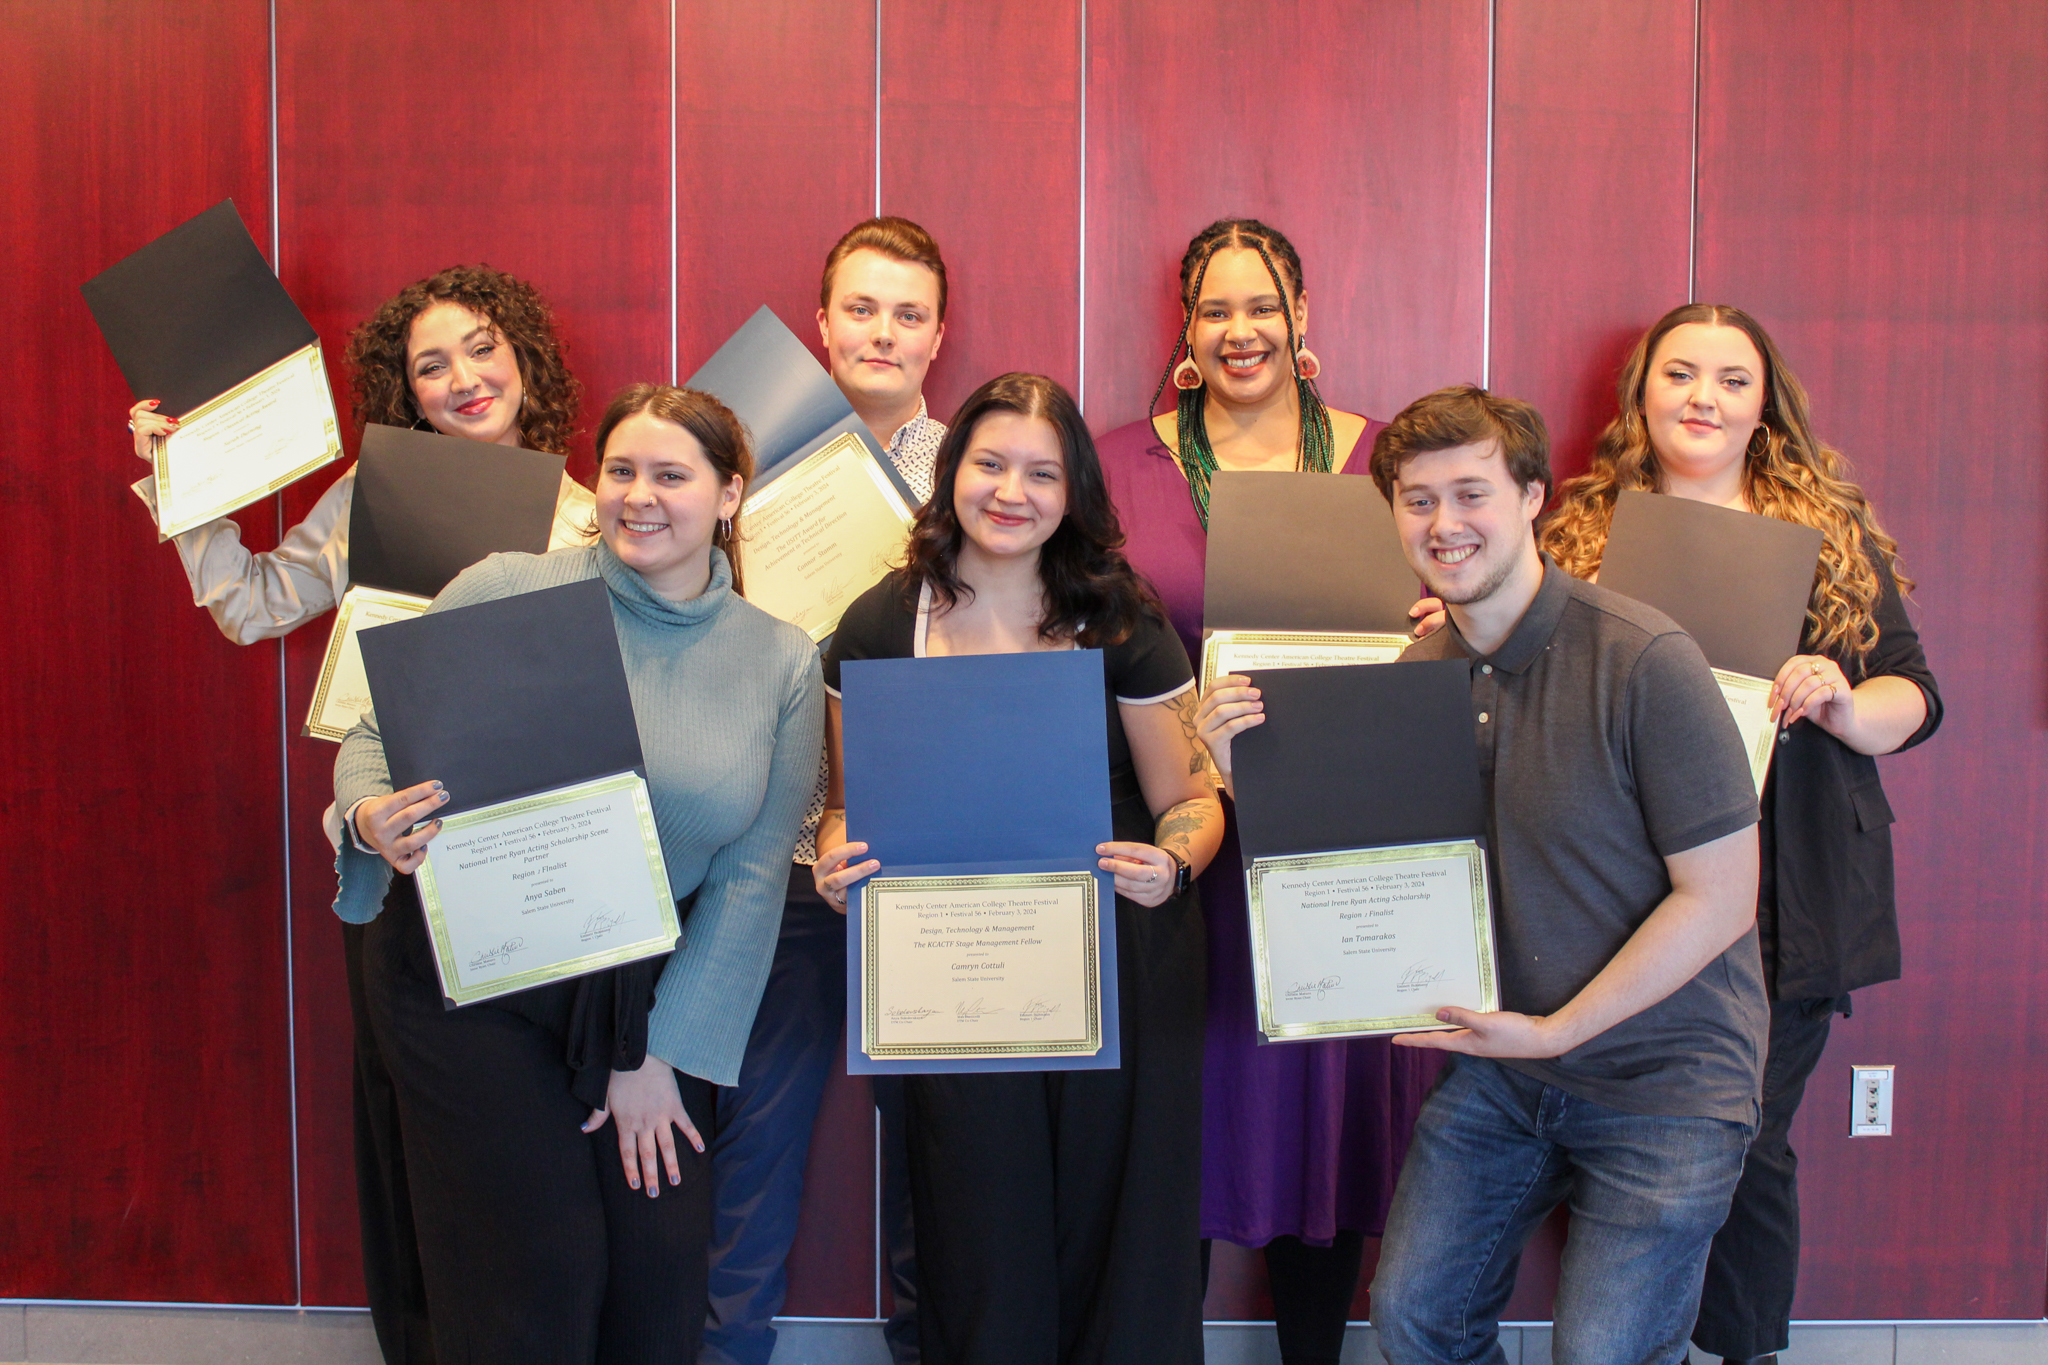 2024 KCACTF student honorees with certificates